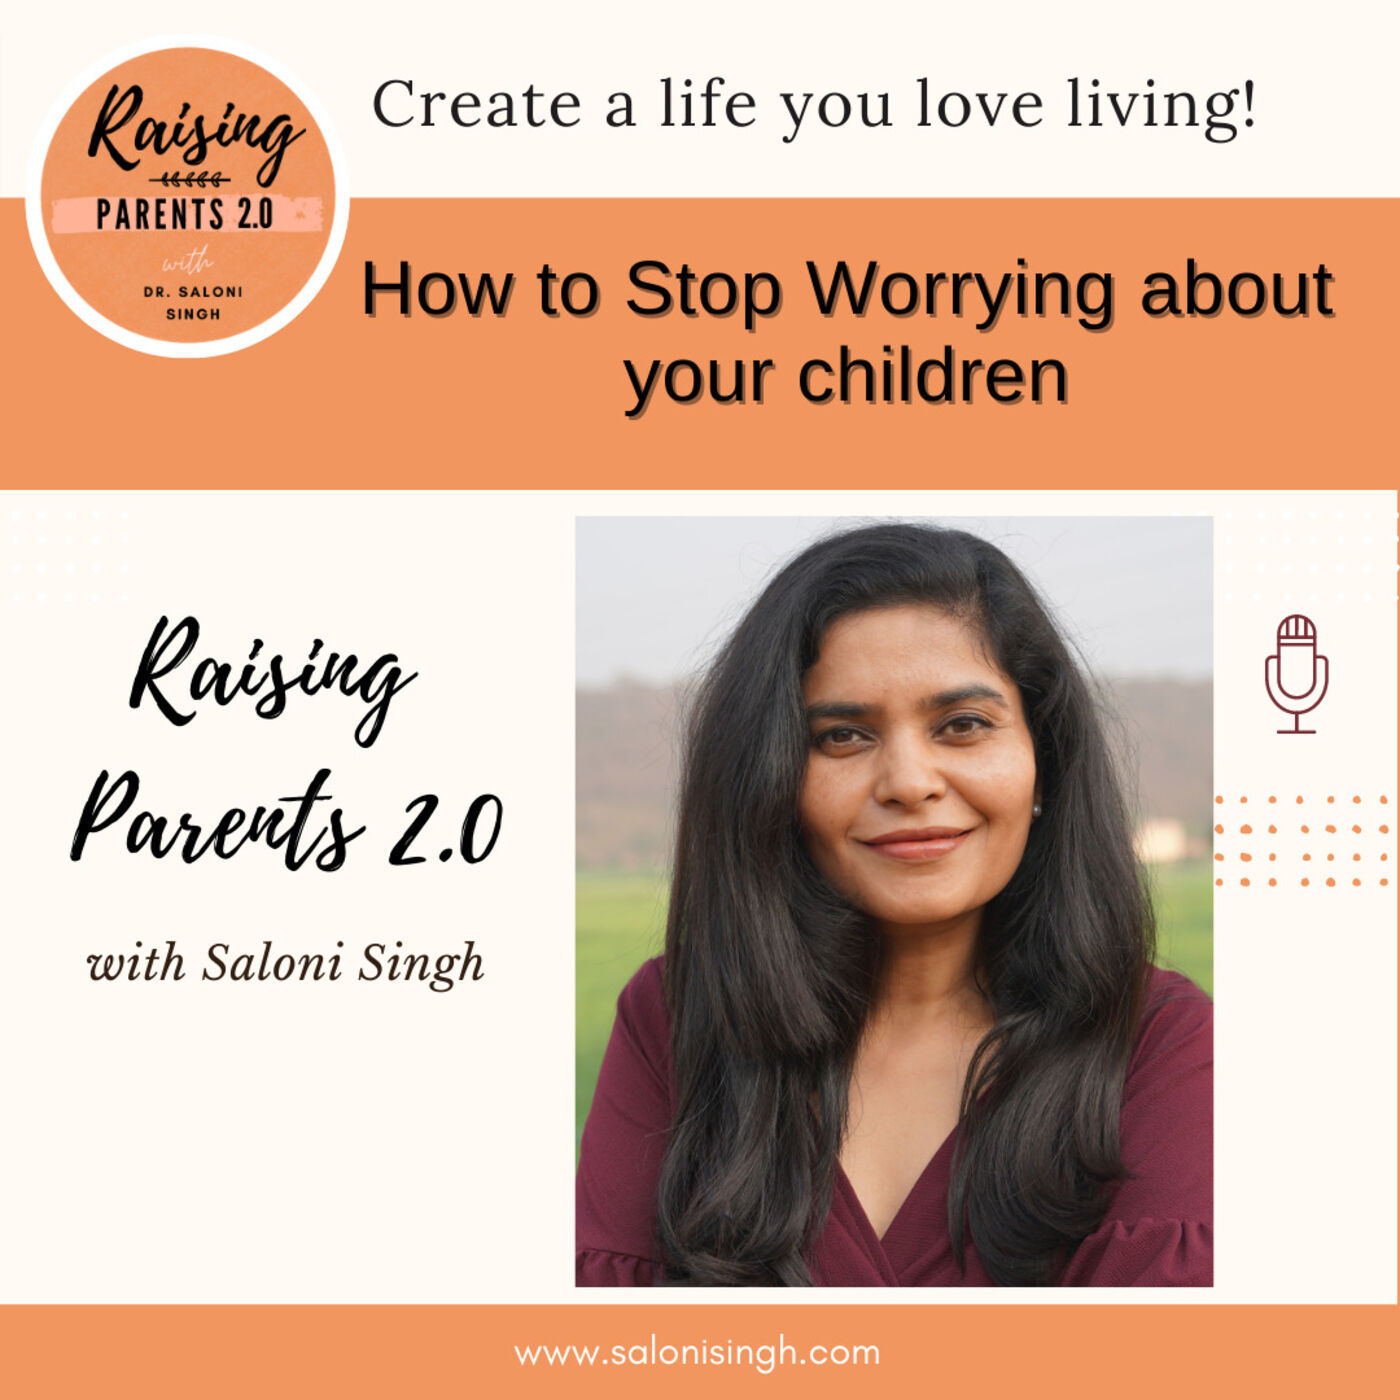 How to Stop Worrying About Your Children